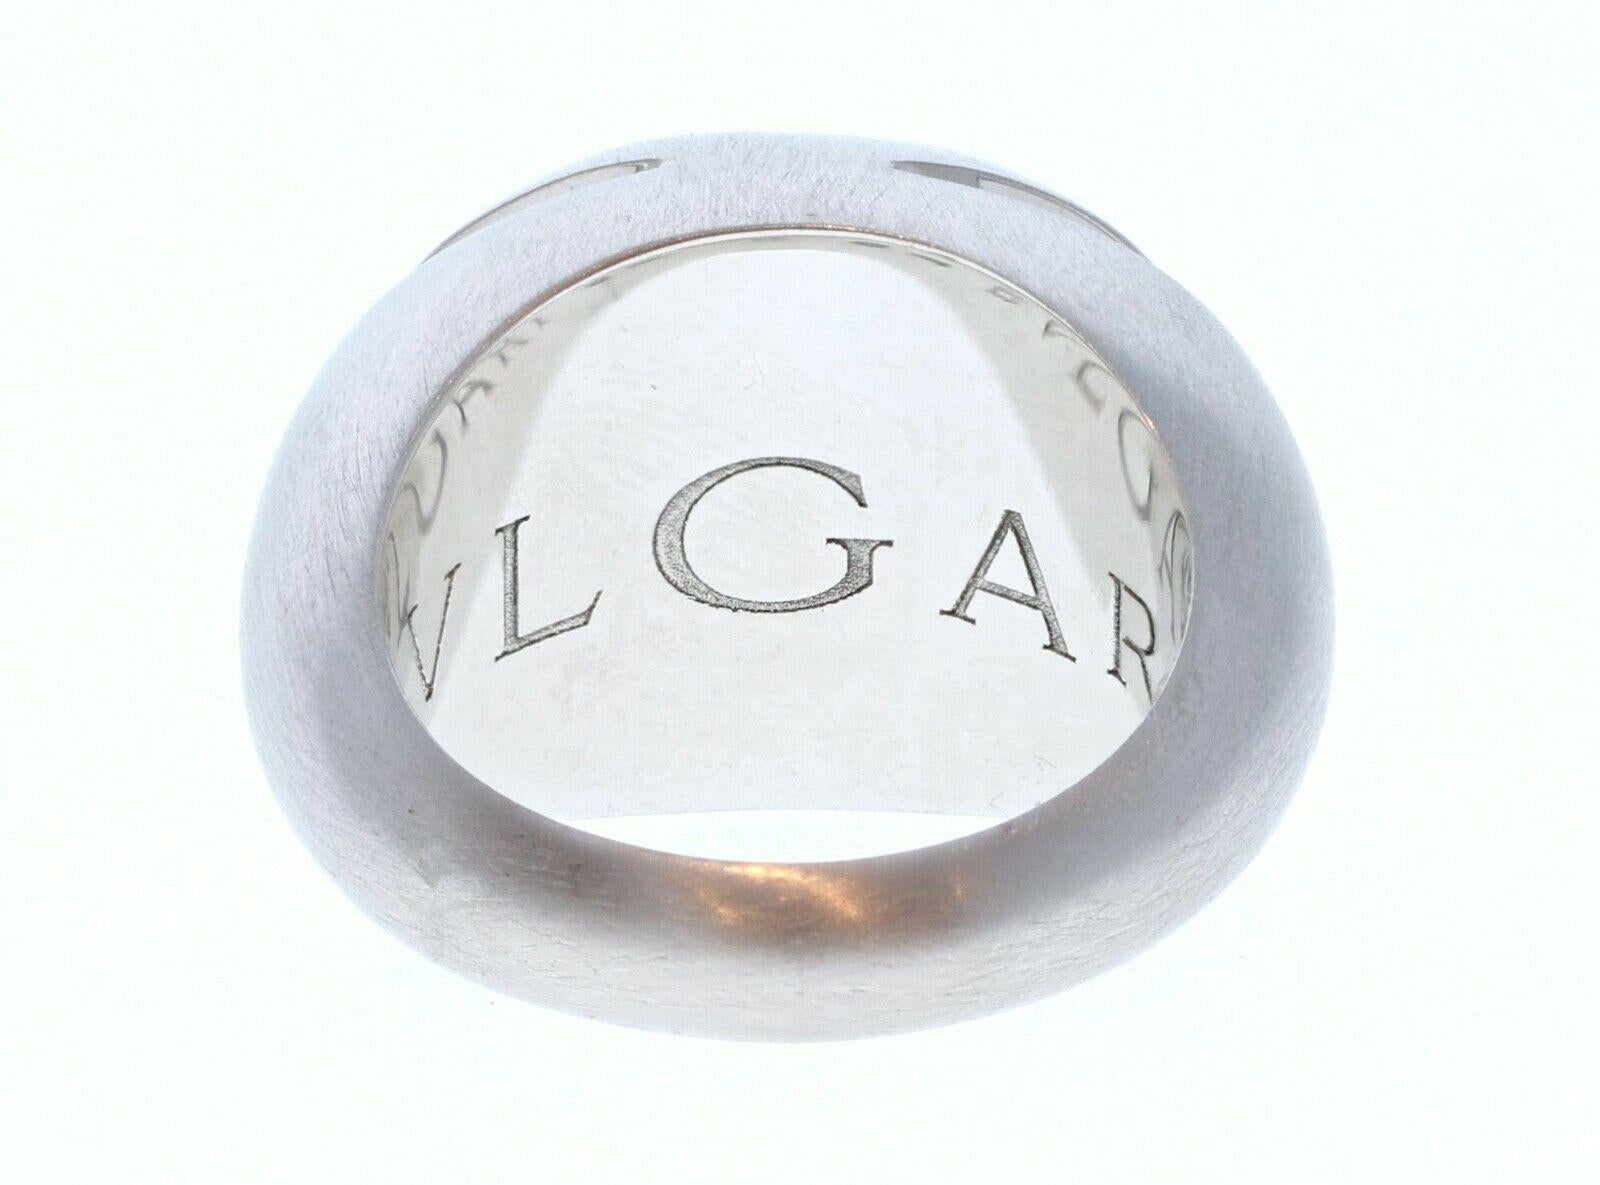 Bvlgari Bulgari 18K White Gold Textured Dome Ring 9.8g Size 50 

For sale is a Bvlgari dome ring 
The ring is a size 50 US size 5.25
 Perfect worn day or night.
 Get this stunning ring now!



Metal: 18k white gold
     
Hallmark: 750 Made in Italy